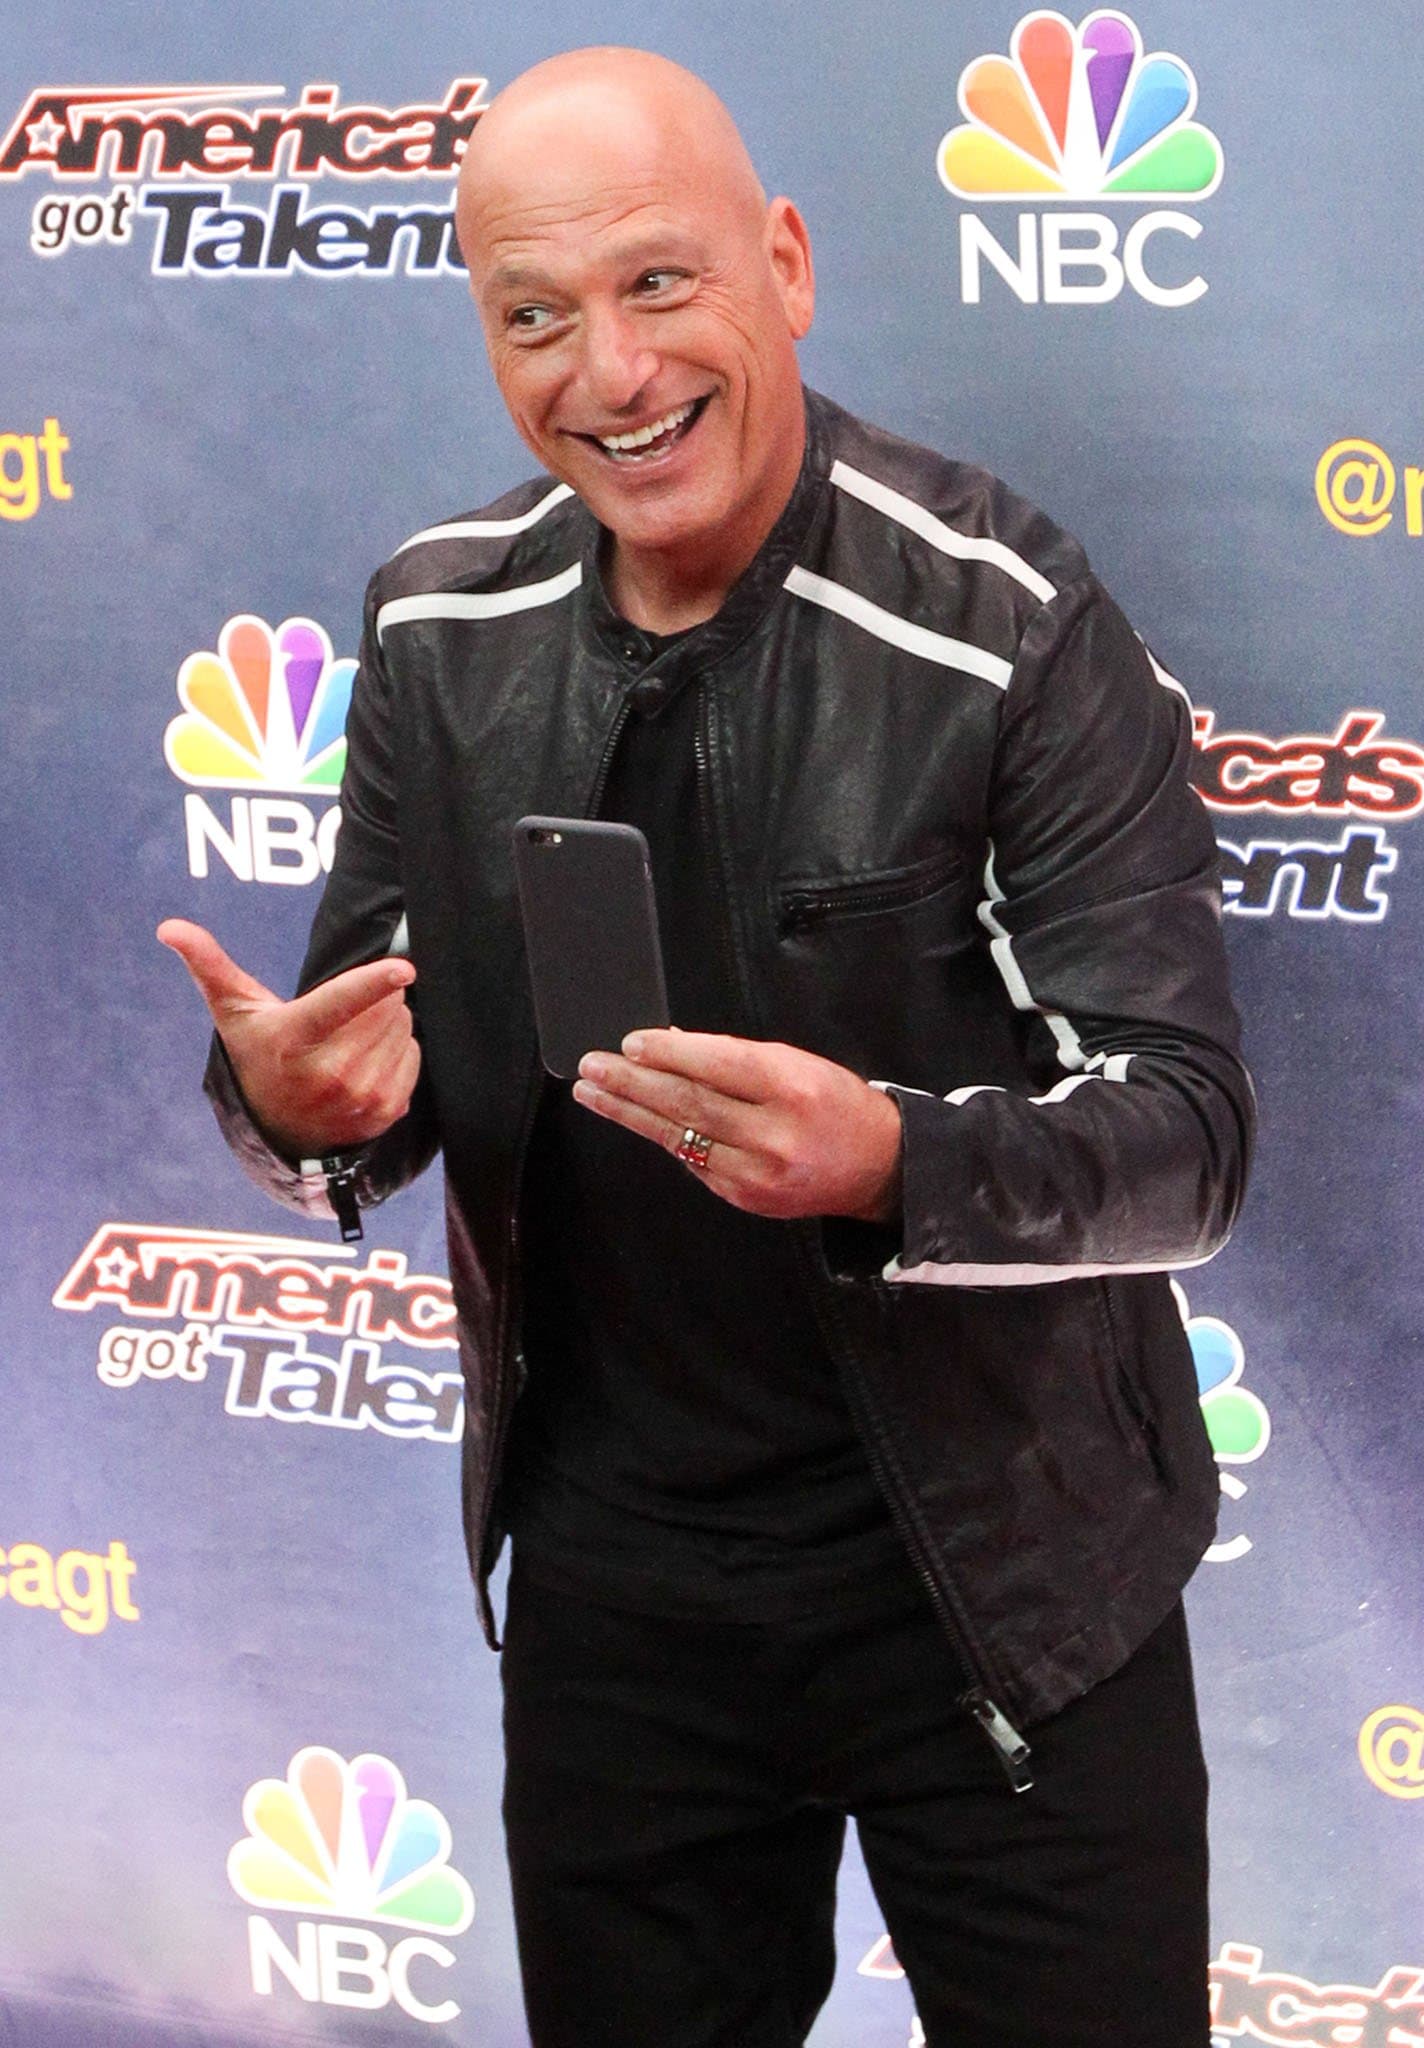 Before becoming a well-known TV personality and host, Howie Mandel started out in stand-up comedy in the late 1970s